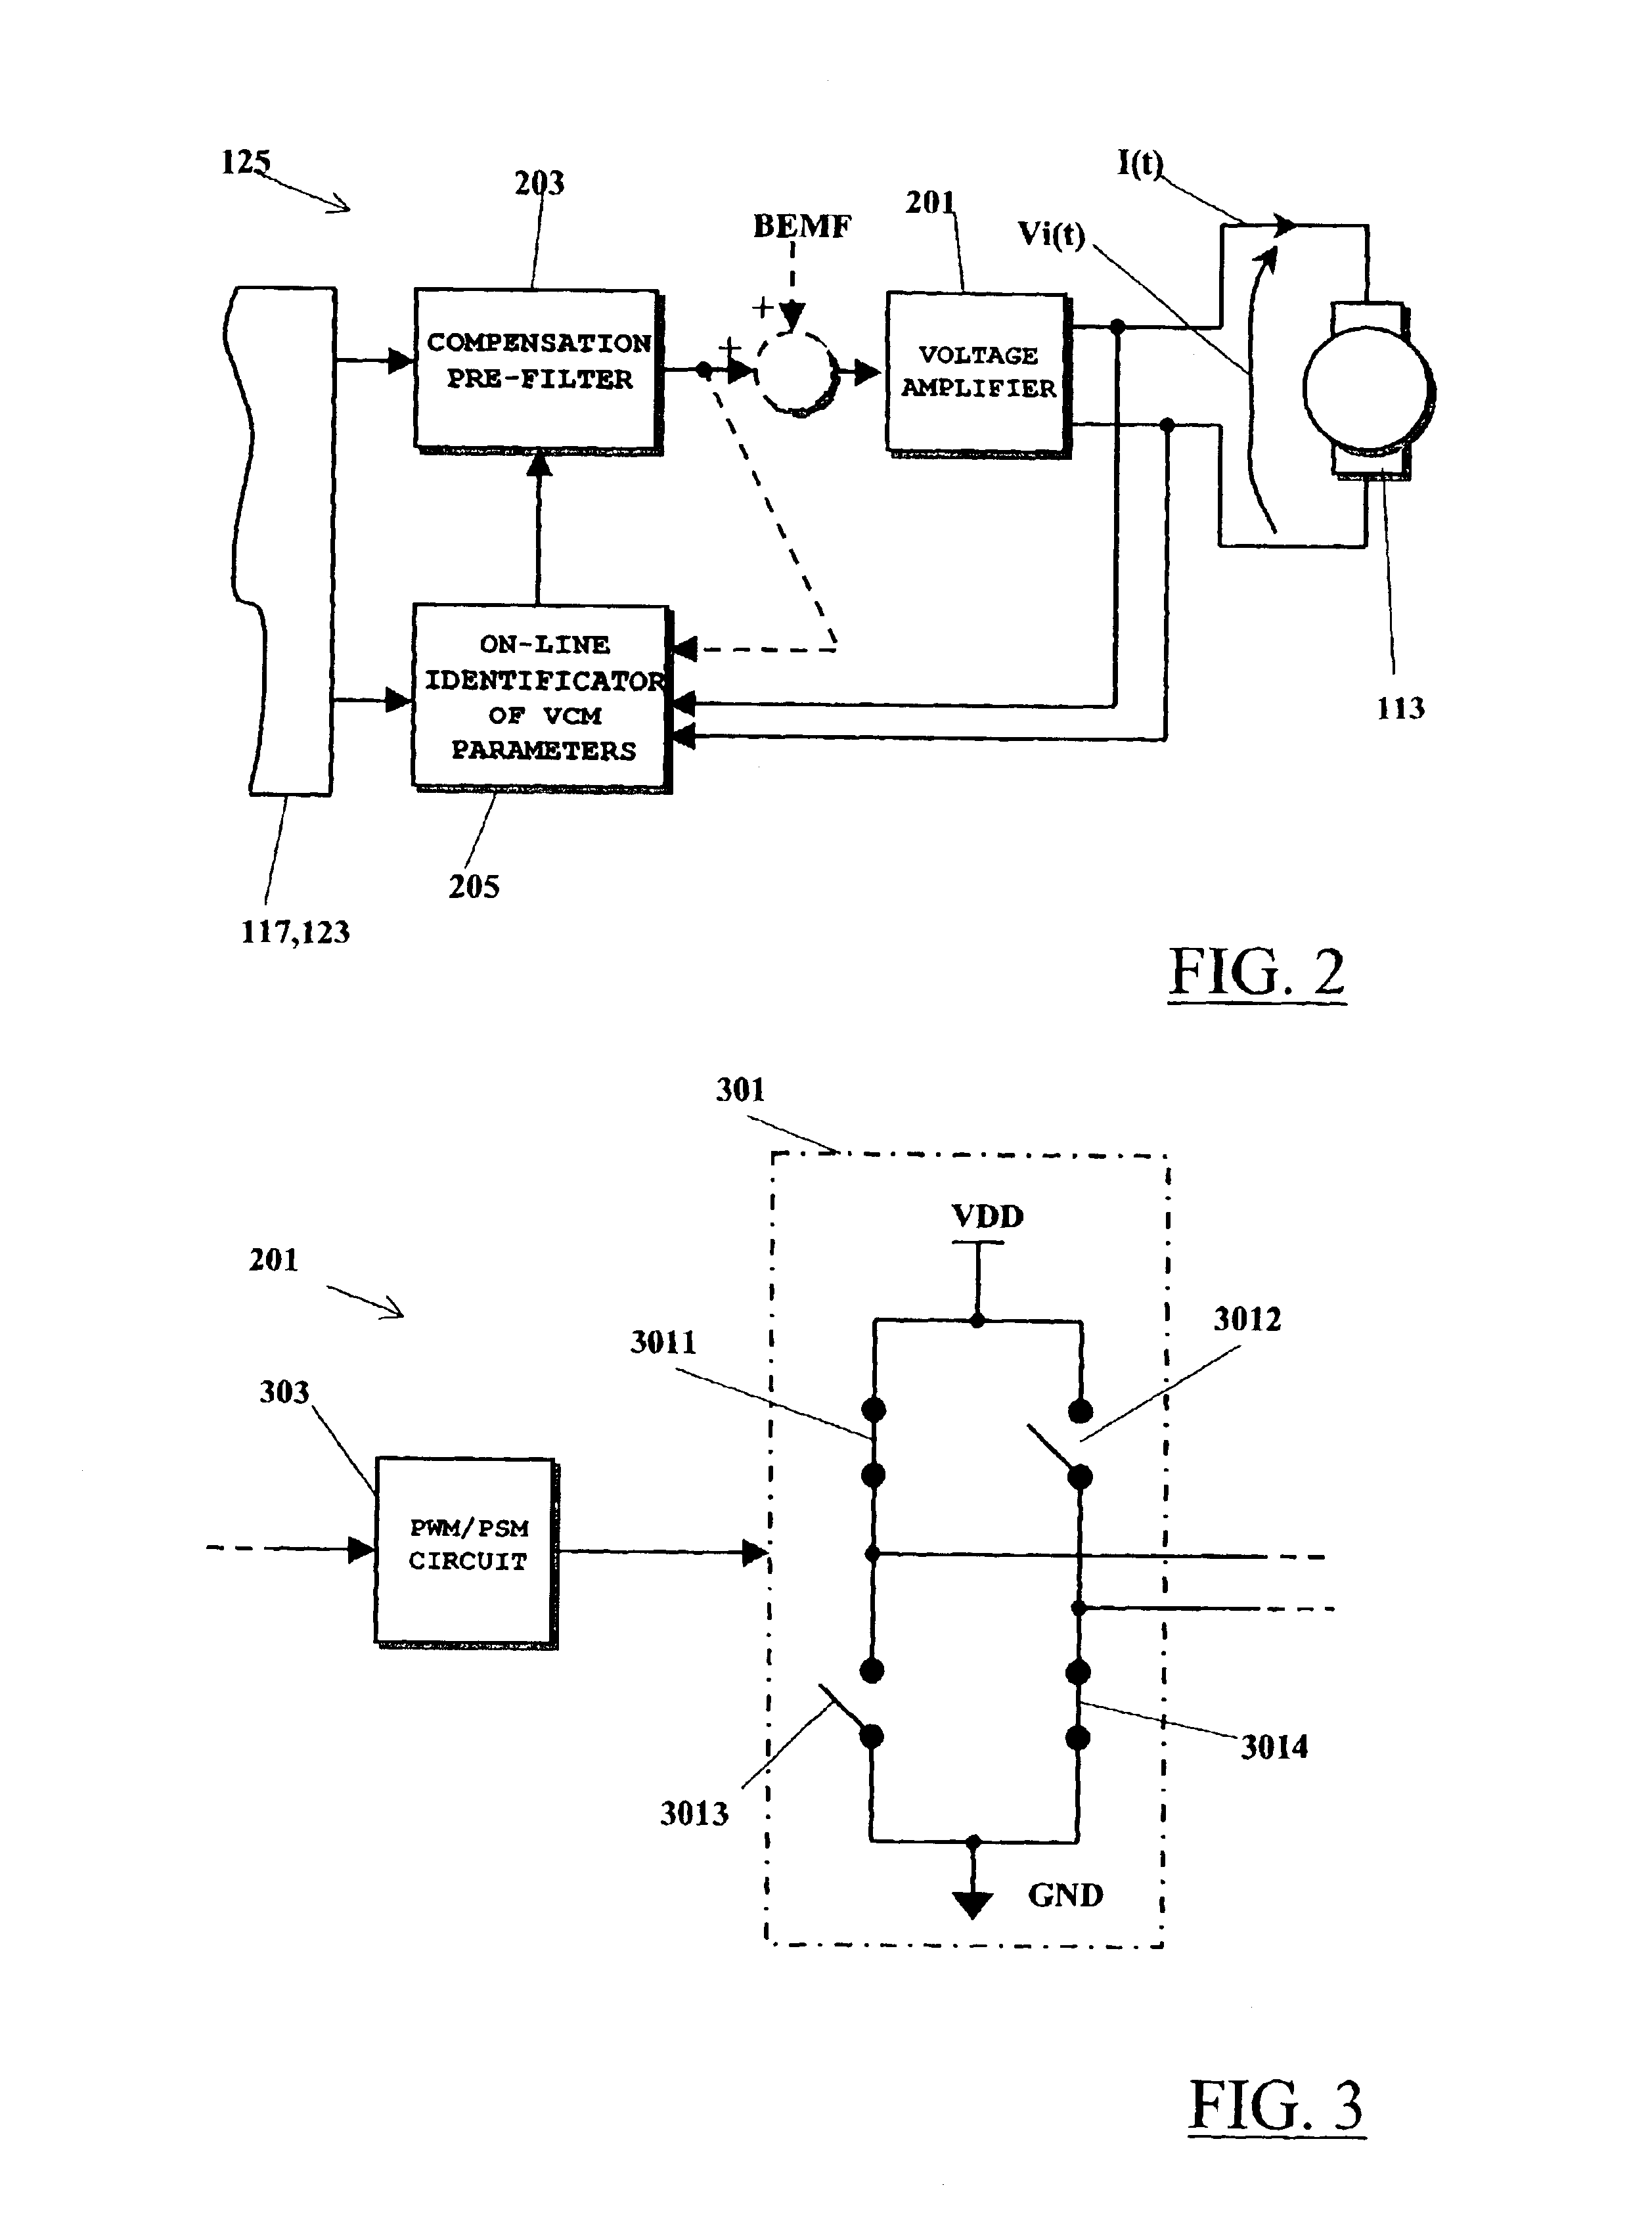 Voltage-mode drive for driving complex impedance loads